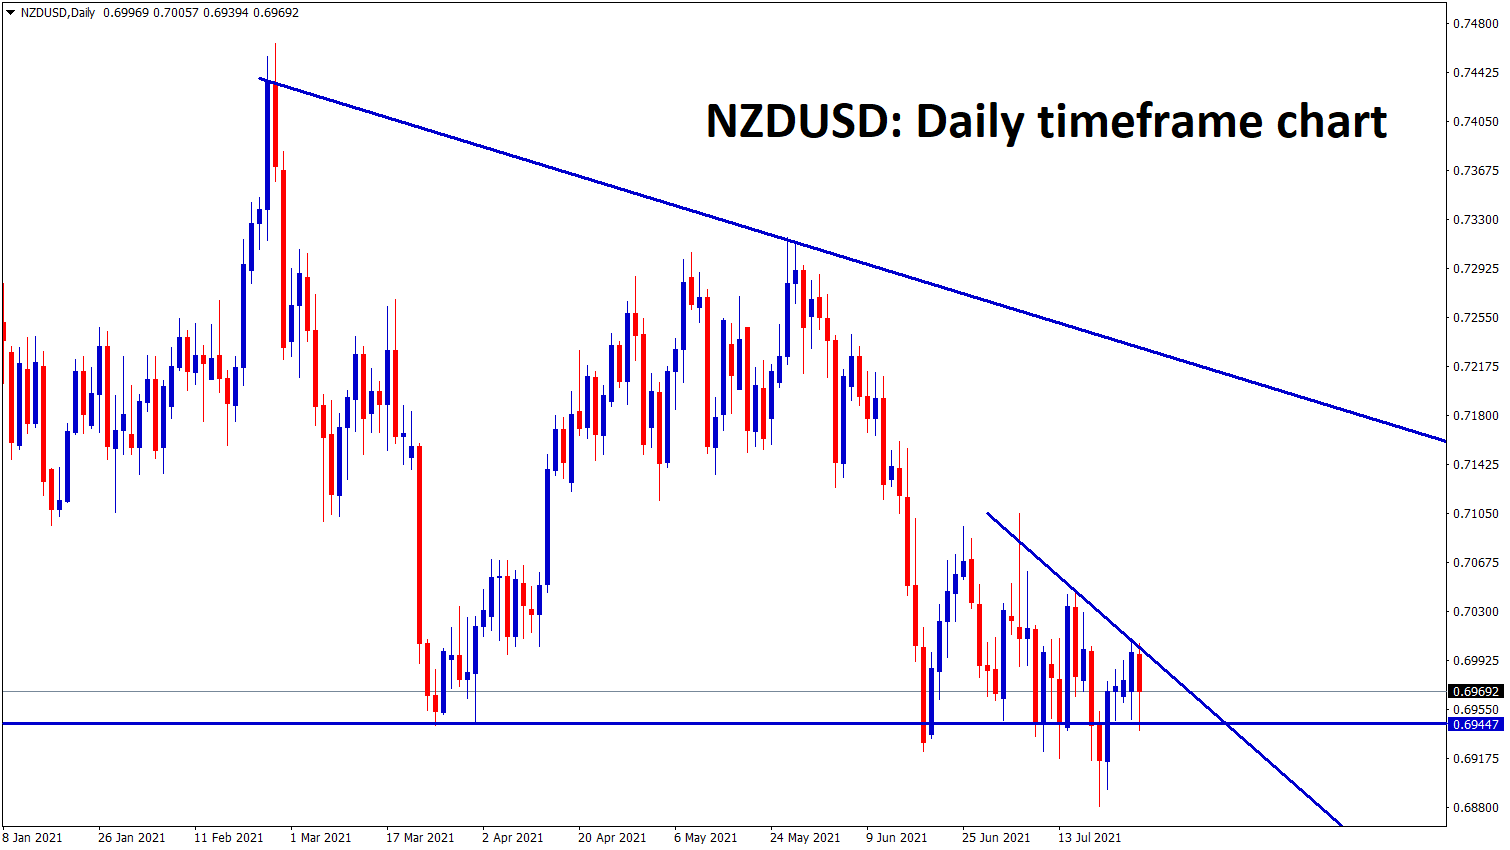 NZDUSD has formed major and minor descending Triangle pattern wait for the breakout from the minor triangle pattern